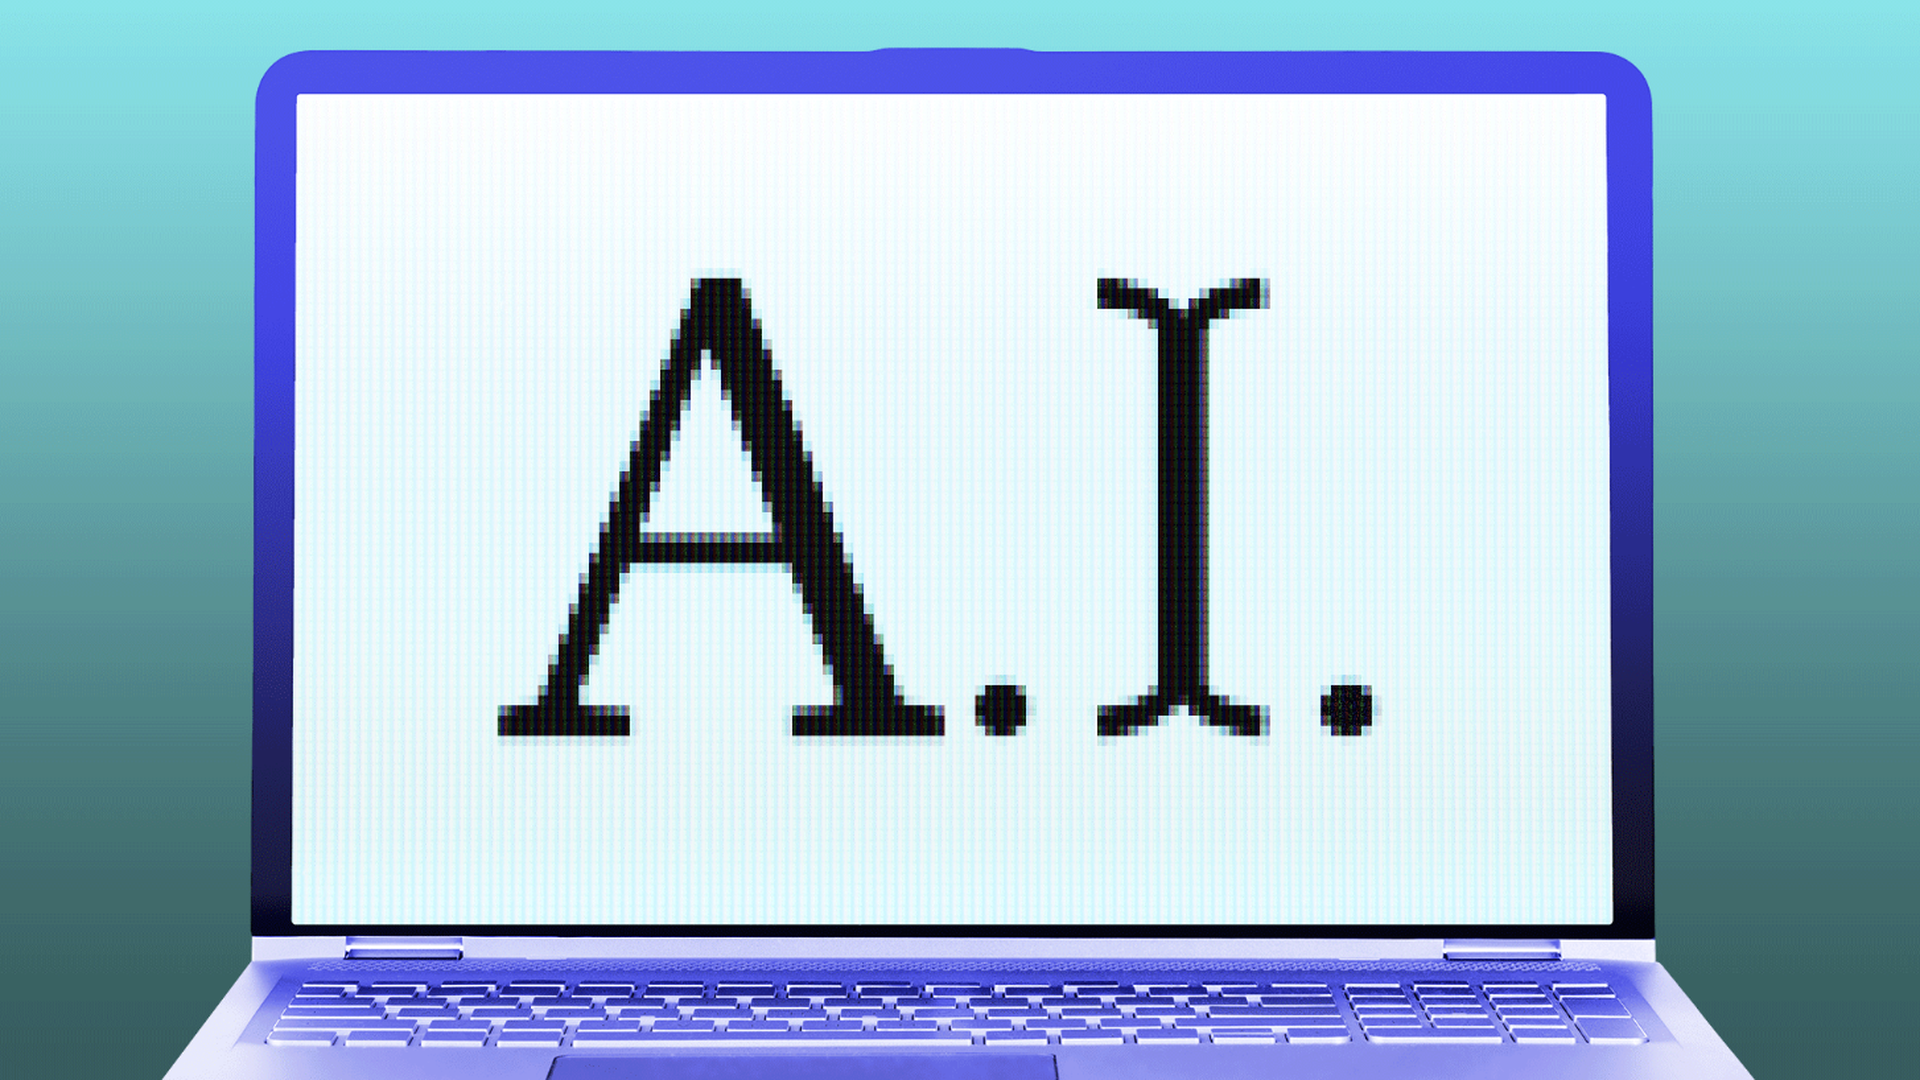 Illustration of a laptop screen showing the characters "A.I." with the I represented by a blinking insert cursor.